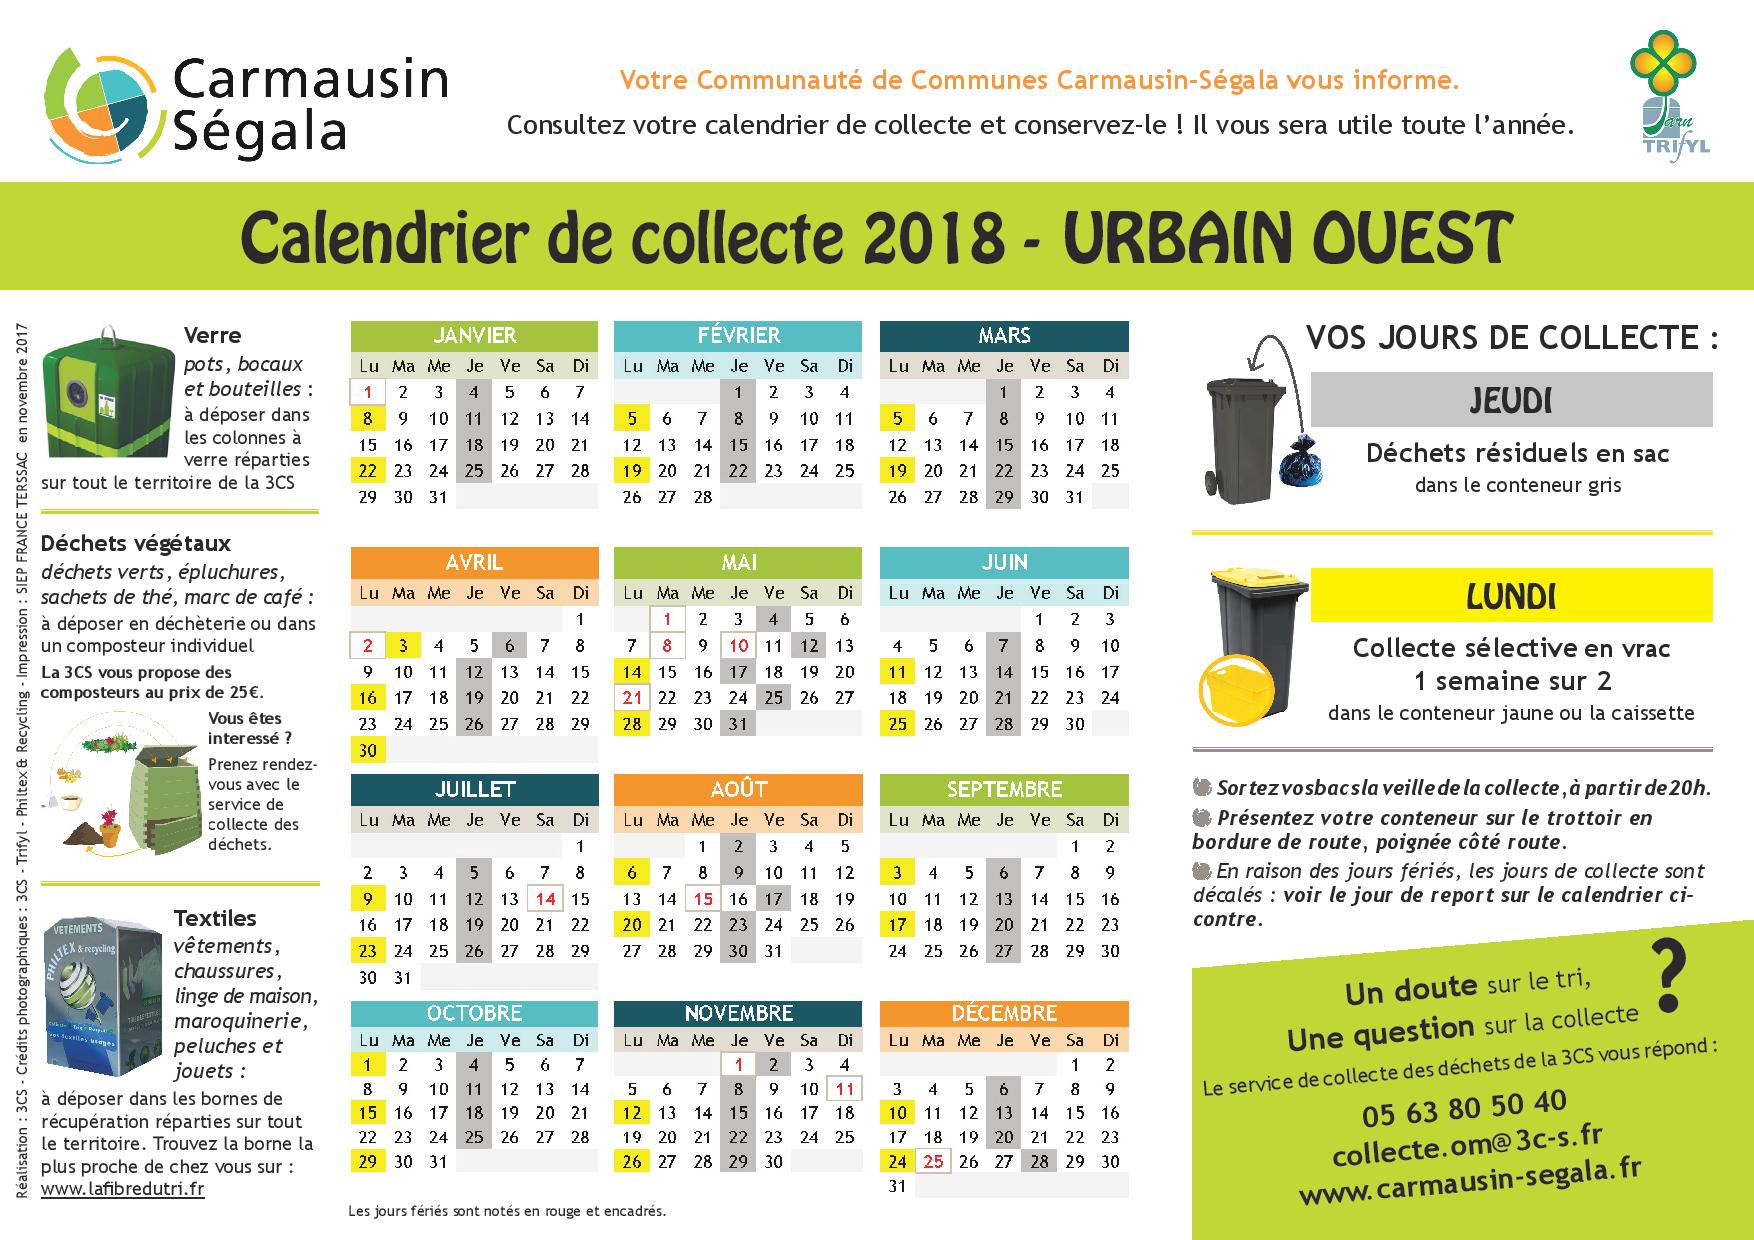 calendriers_om_2018_urbain_ouest-page-001.jpg